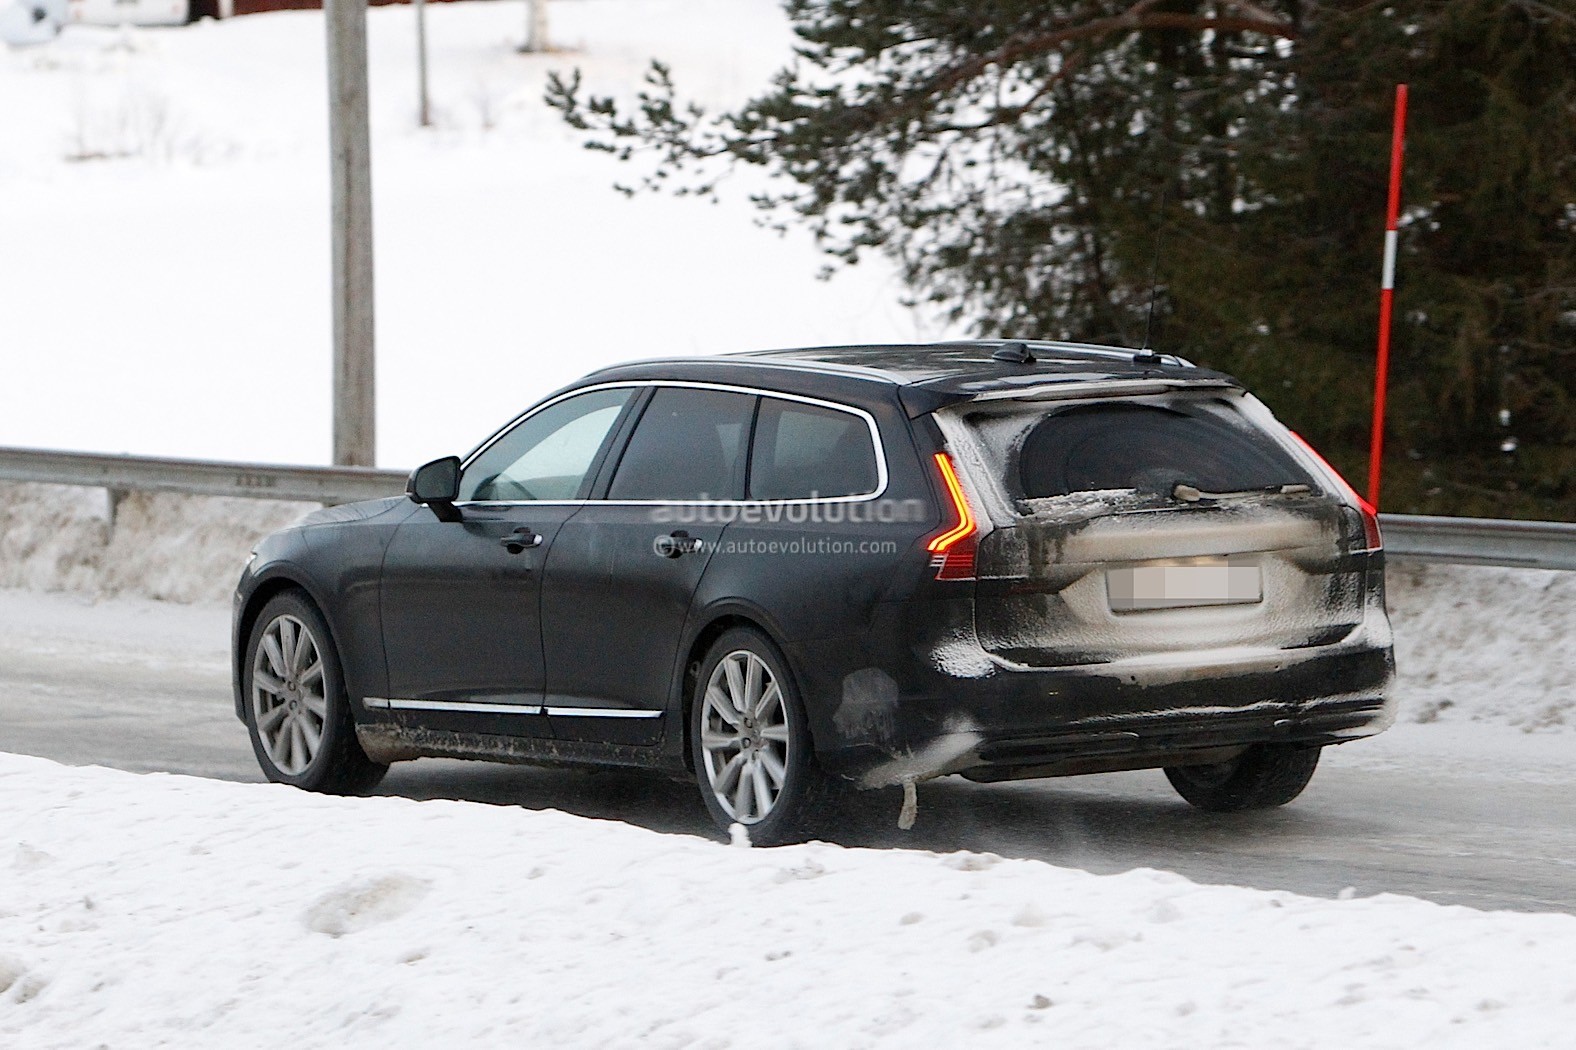 https://s1.cdn.autoevolution.com/images/news/gallery/2021-volvo-s90-and-v90-facelift-wear-useless-camouflage-winter-testing_11.jpg